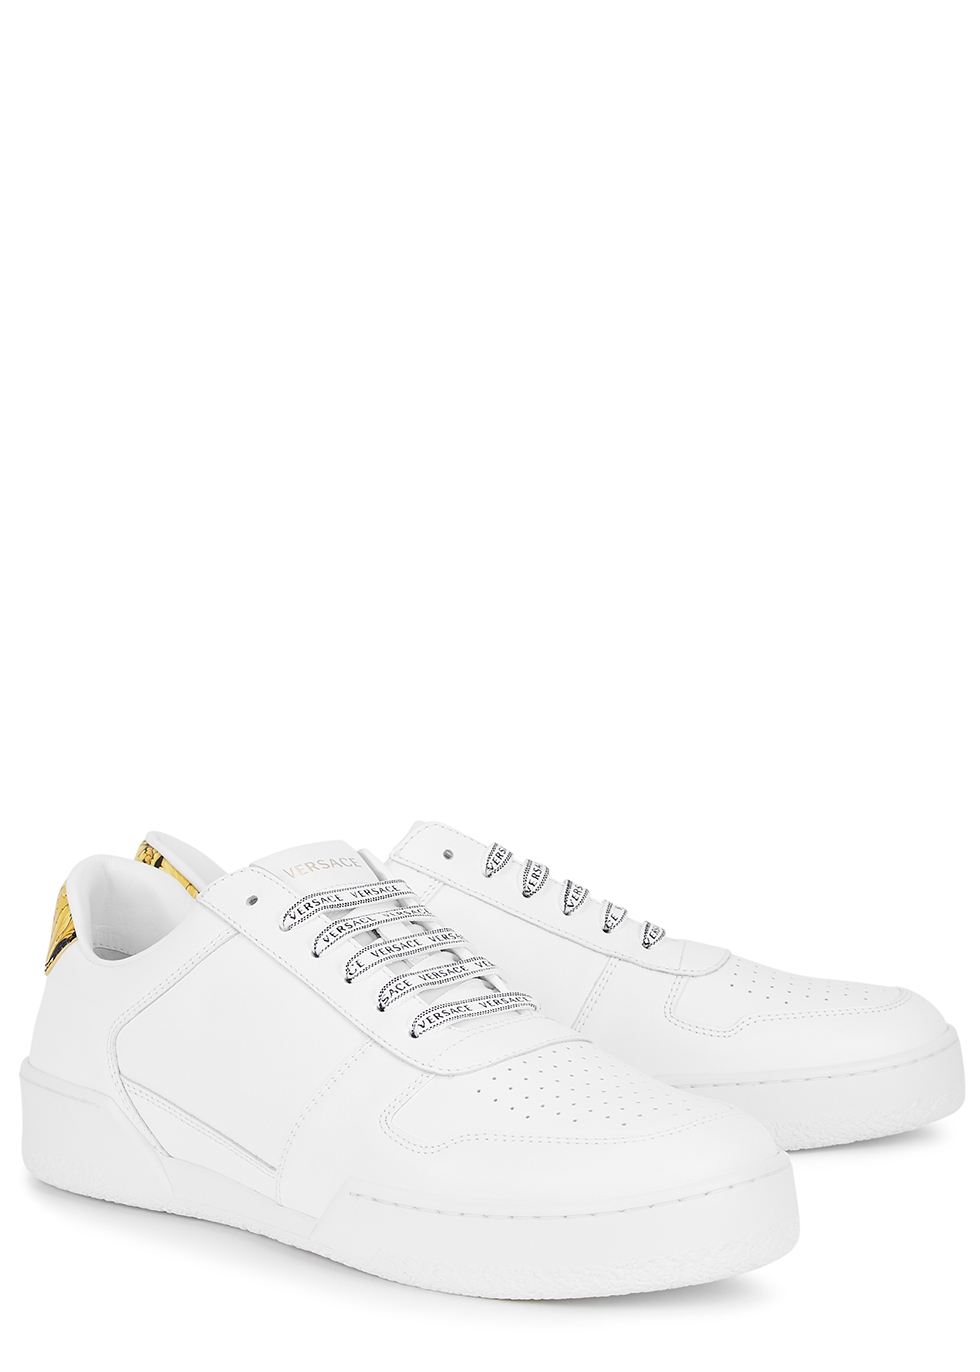 all white versace shoes